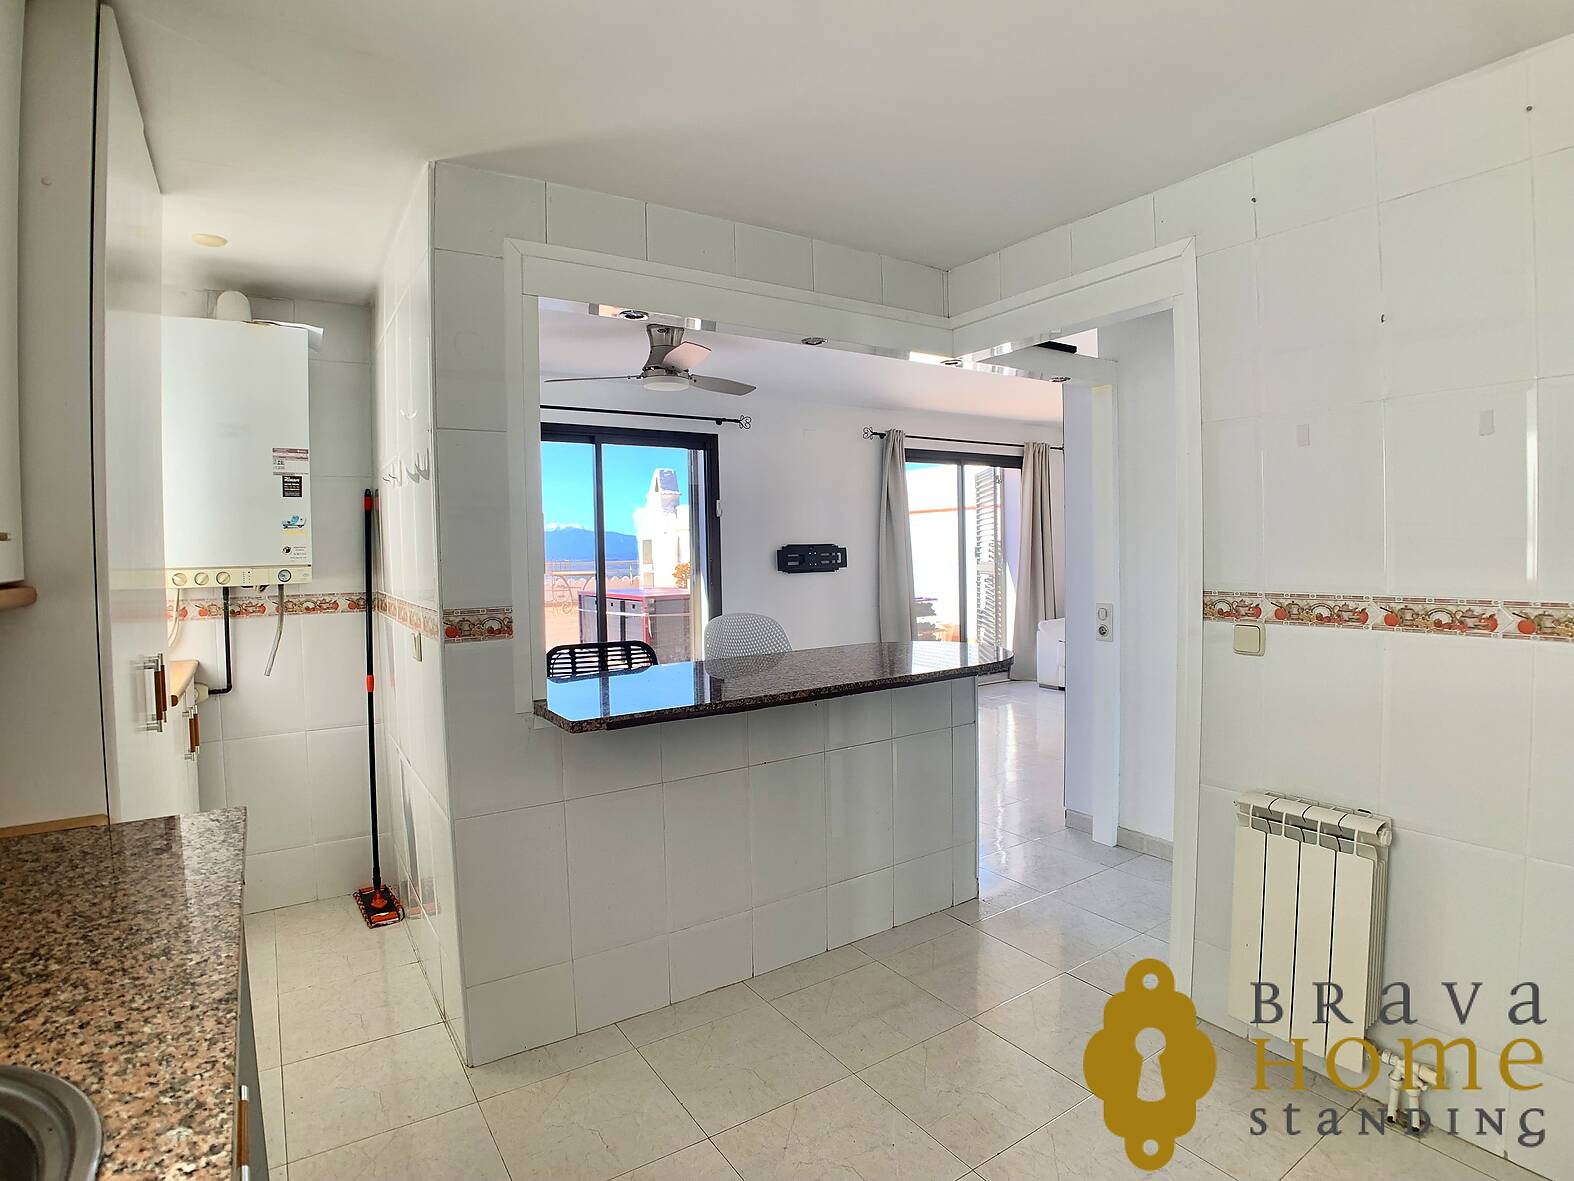 Beautiful house with sea view and pool for sale in Rosas